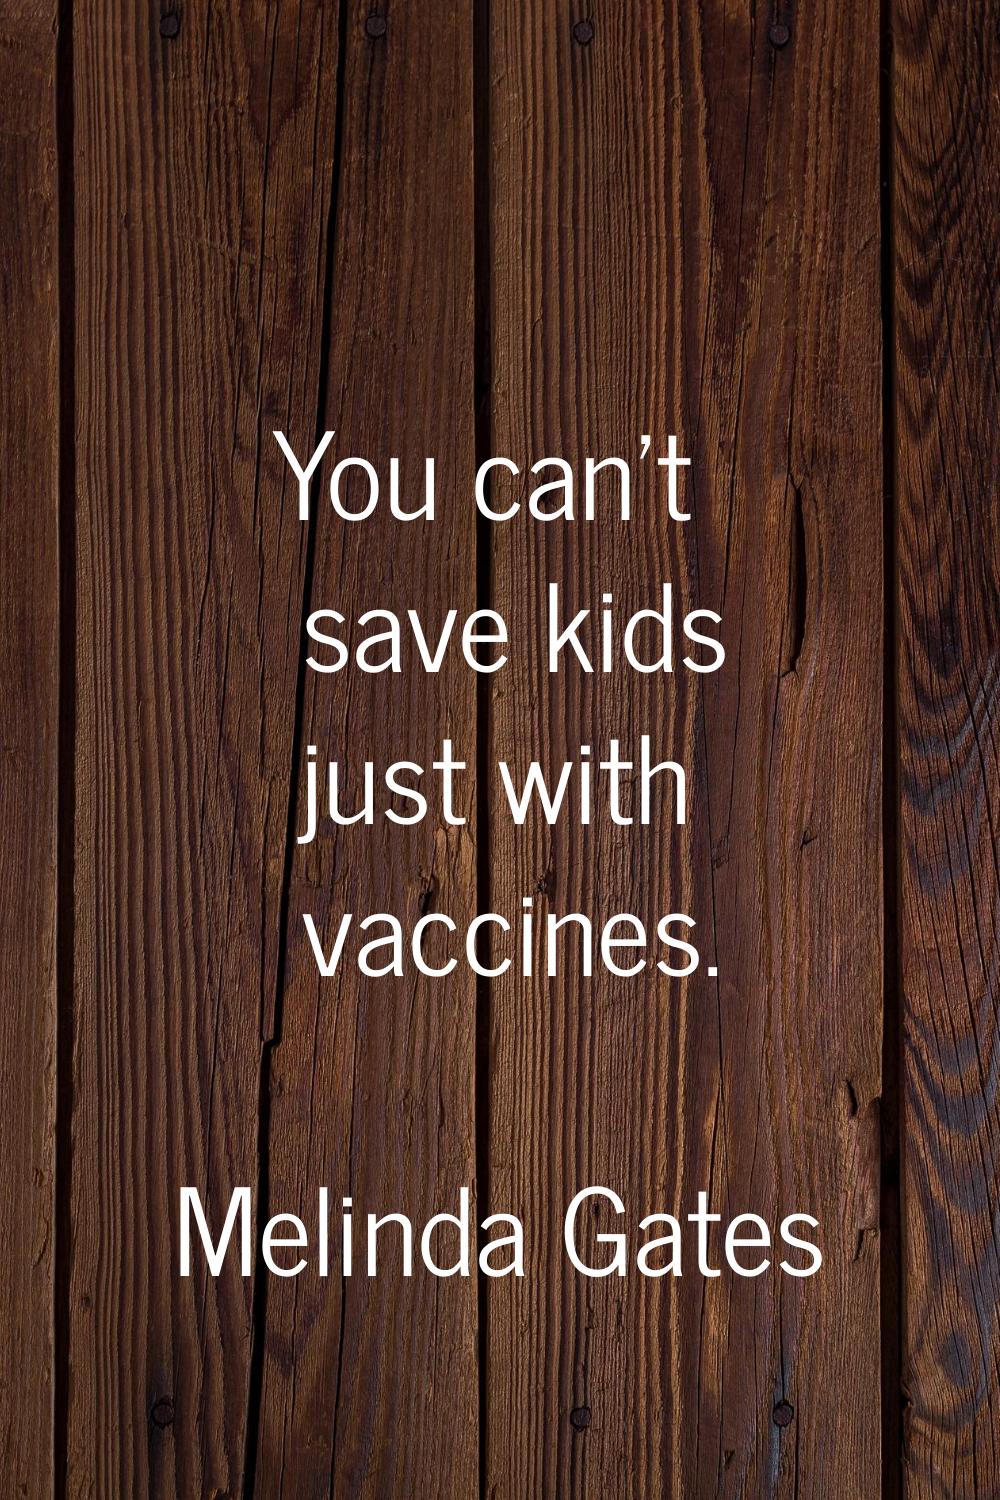 You can't save kids just with vaccines.